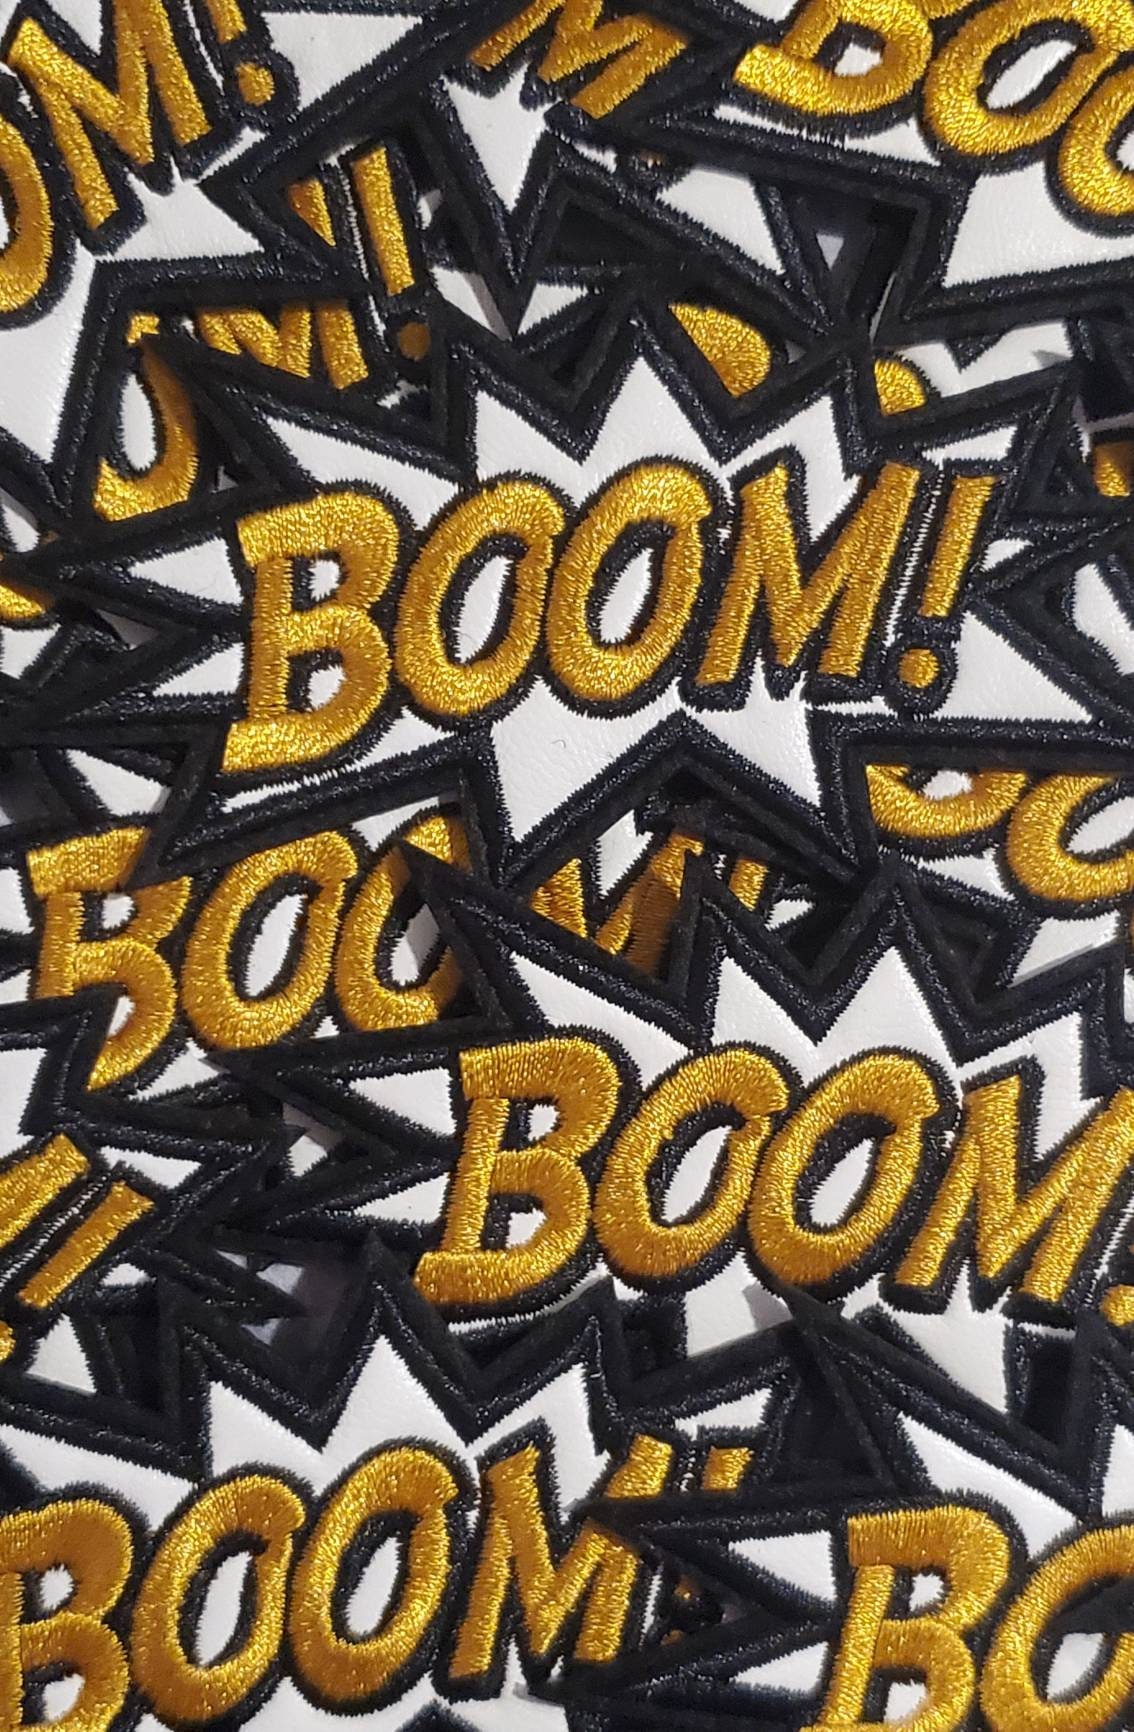 New Arrival, Leather Iron-On "BOOM" Embroidered Patch, Cool, Starburst Statement Patch for Crafts, Small Patch for DIY, Size 4"